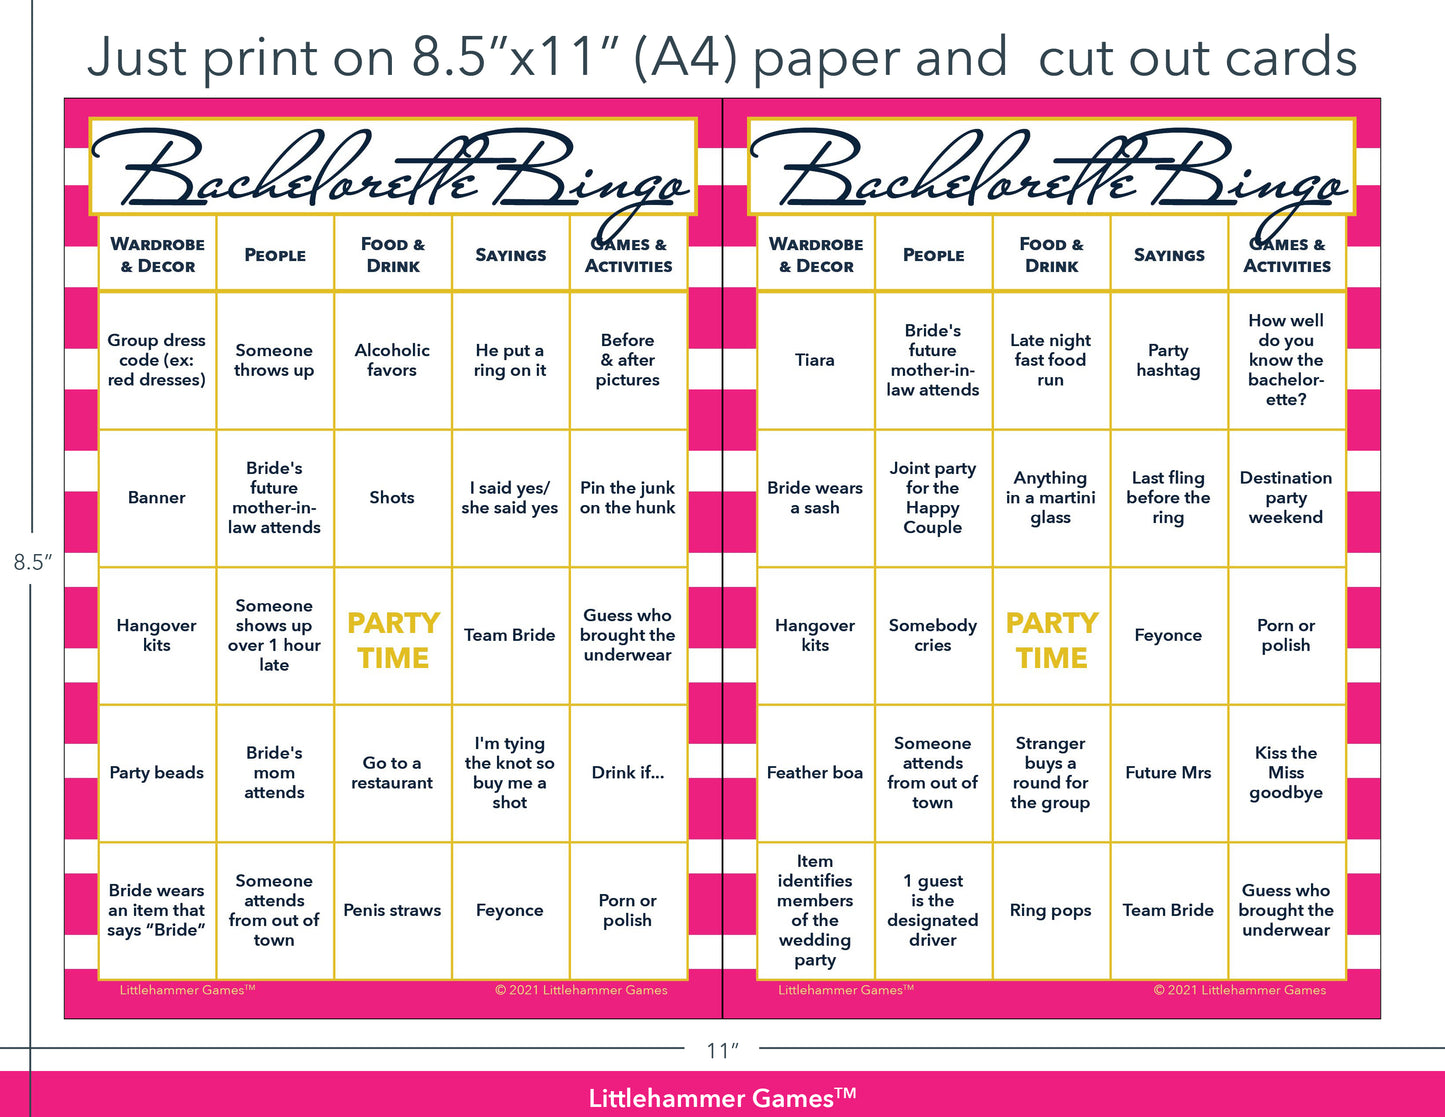 Hot pink-striped Bachelorette Bingo game cards with printing instructions